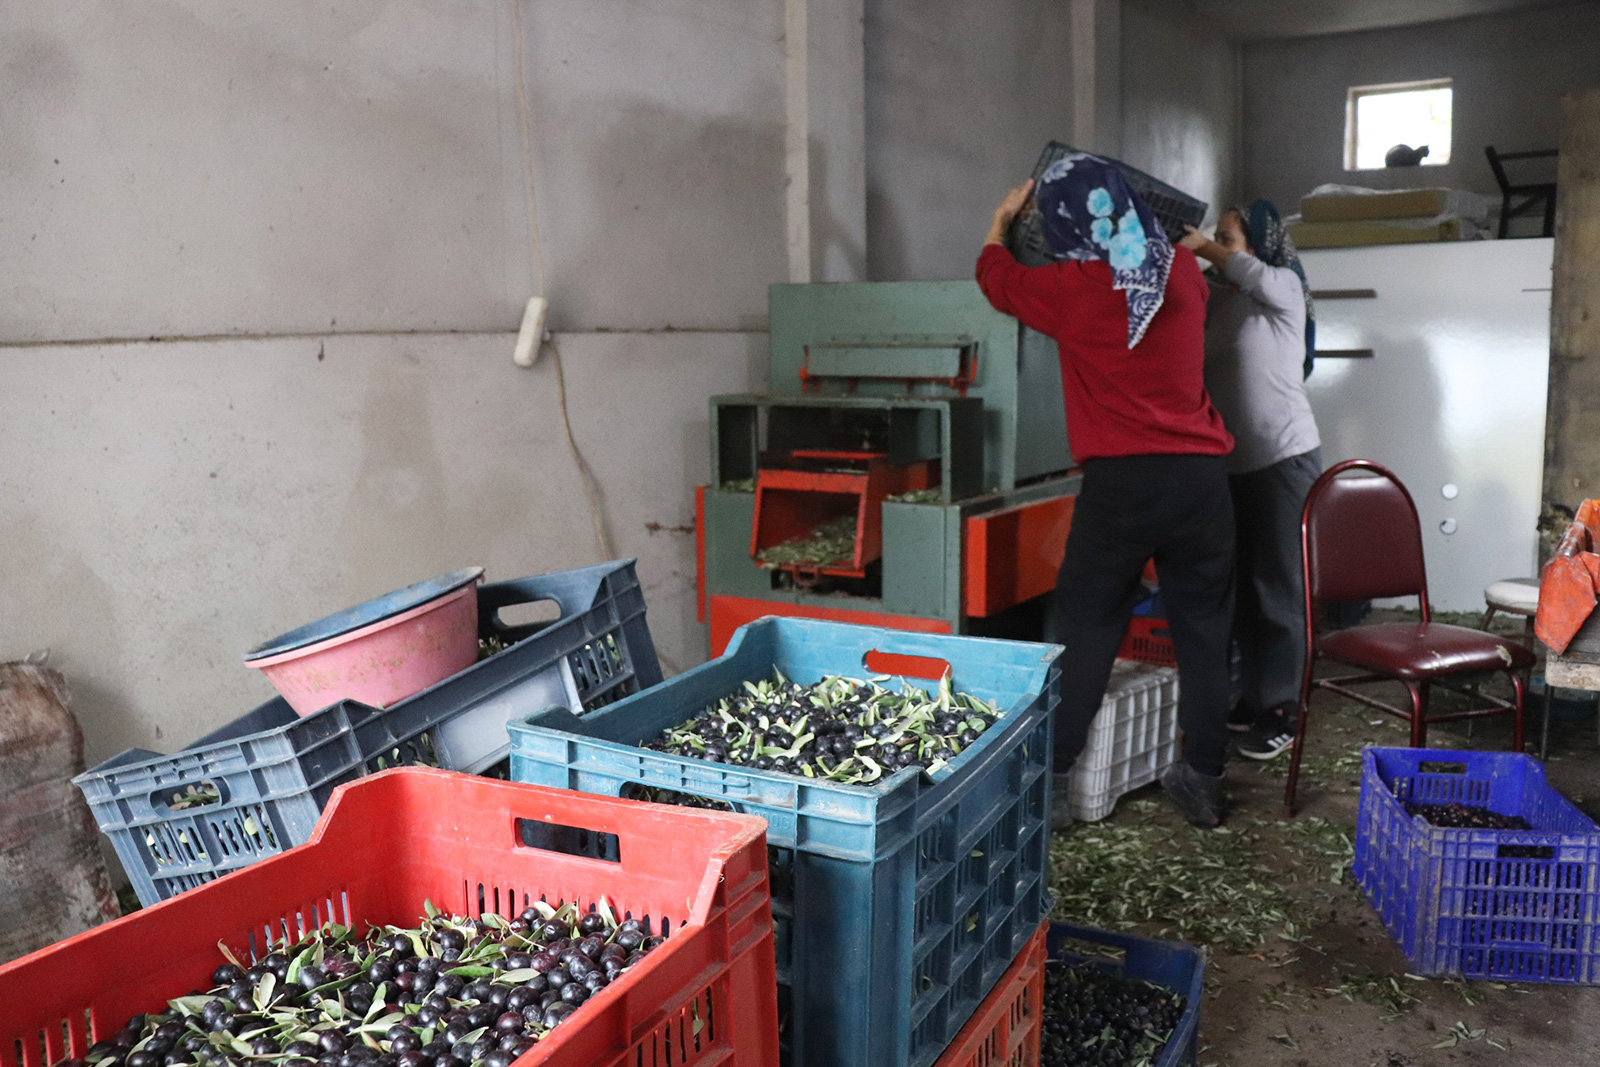 Olive grove farming in Edincik, Marmara, Turkey. Photo by Adele Walton. Caption: Ozlem, [Adele’s mum], and Vildan, [Adele’s auntie], sorting our olives by size using our machine before selecting ones to send to the cooperative.